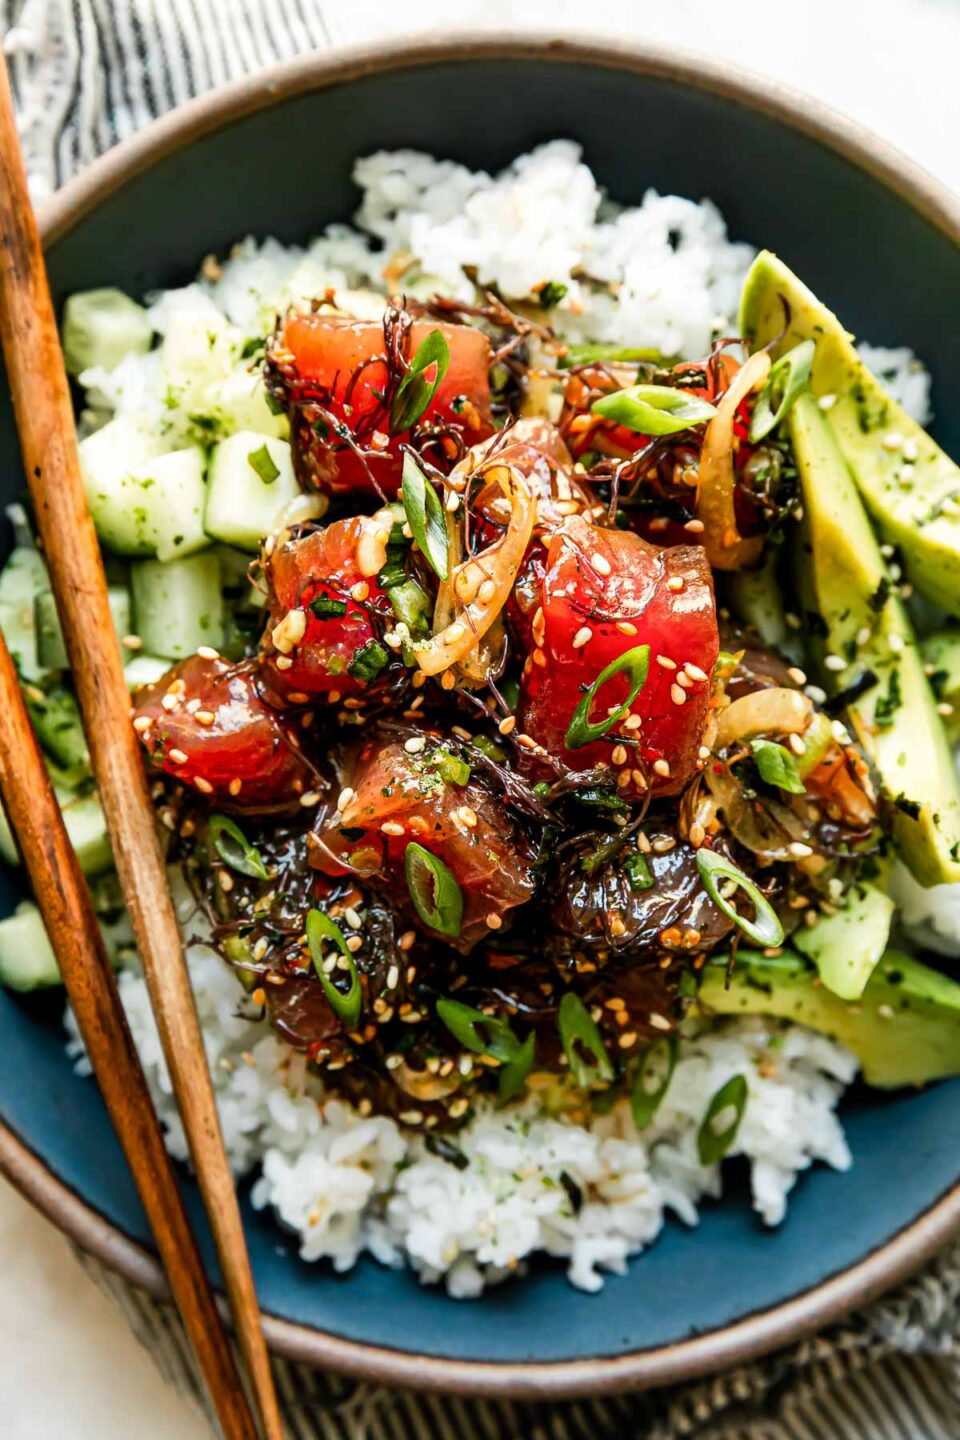 An ahi tuna poke bowl is assembled inside of a large blue ceramic bowl. The bowl sits atop a creamy white textured surface and a pair of wooden chop sticks rests atop the bowl. A blue and white linen napkin is tucked underneath the bowl.